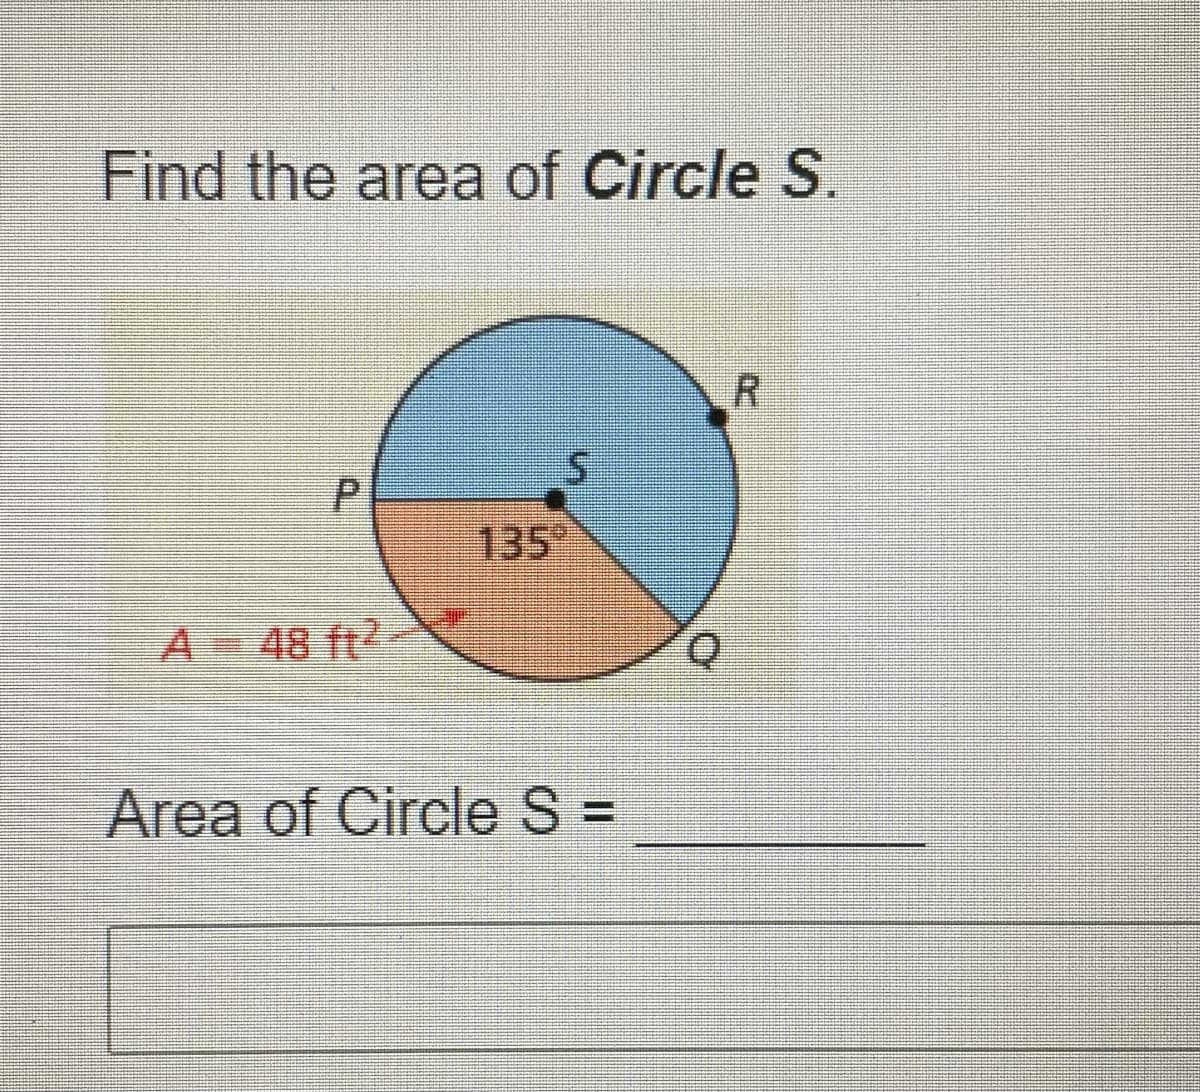 Find the area of Circle S.
R.
135°
A 48 ft2
Area of Circle S =
